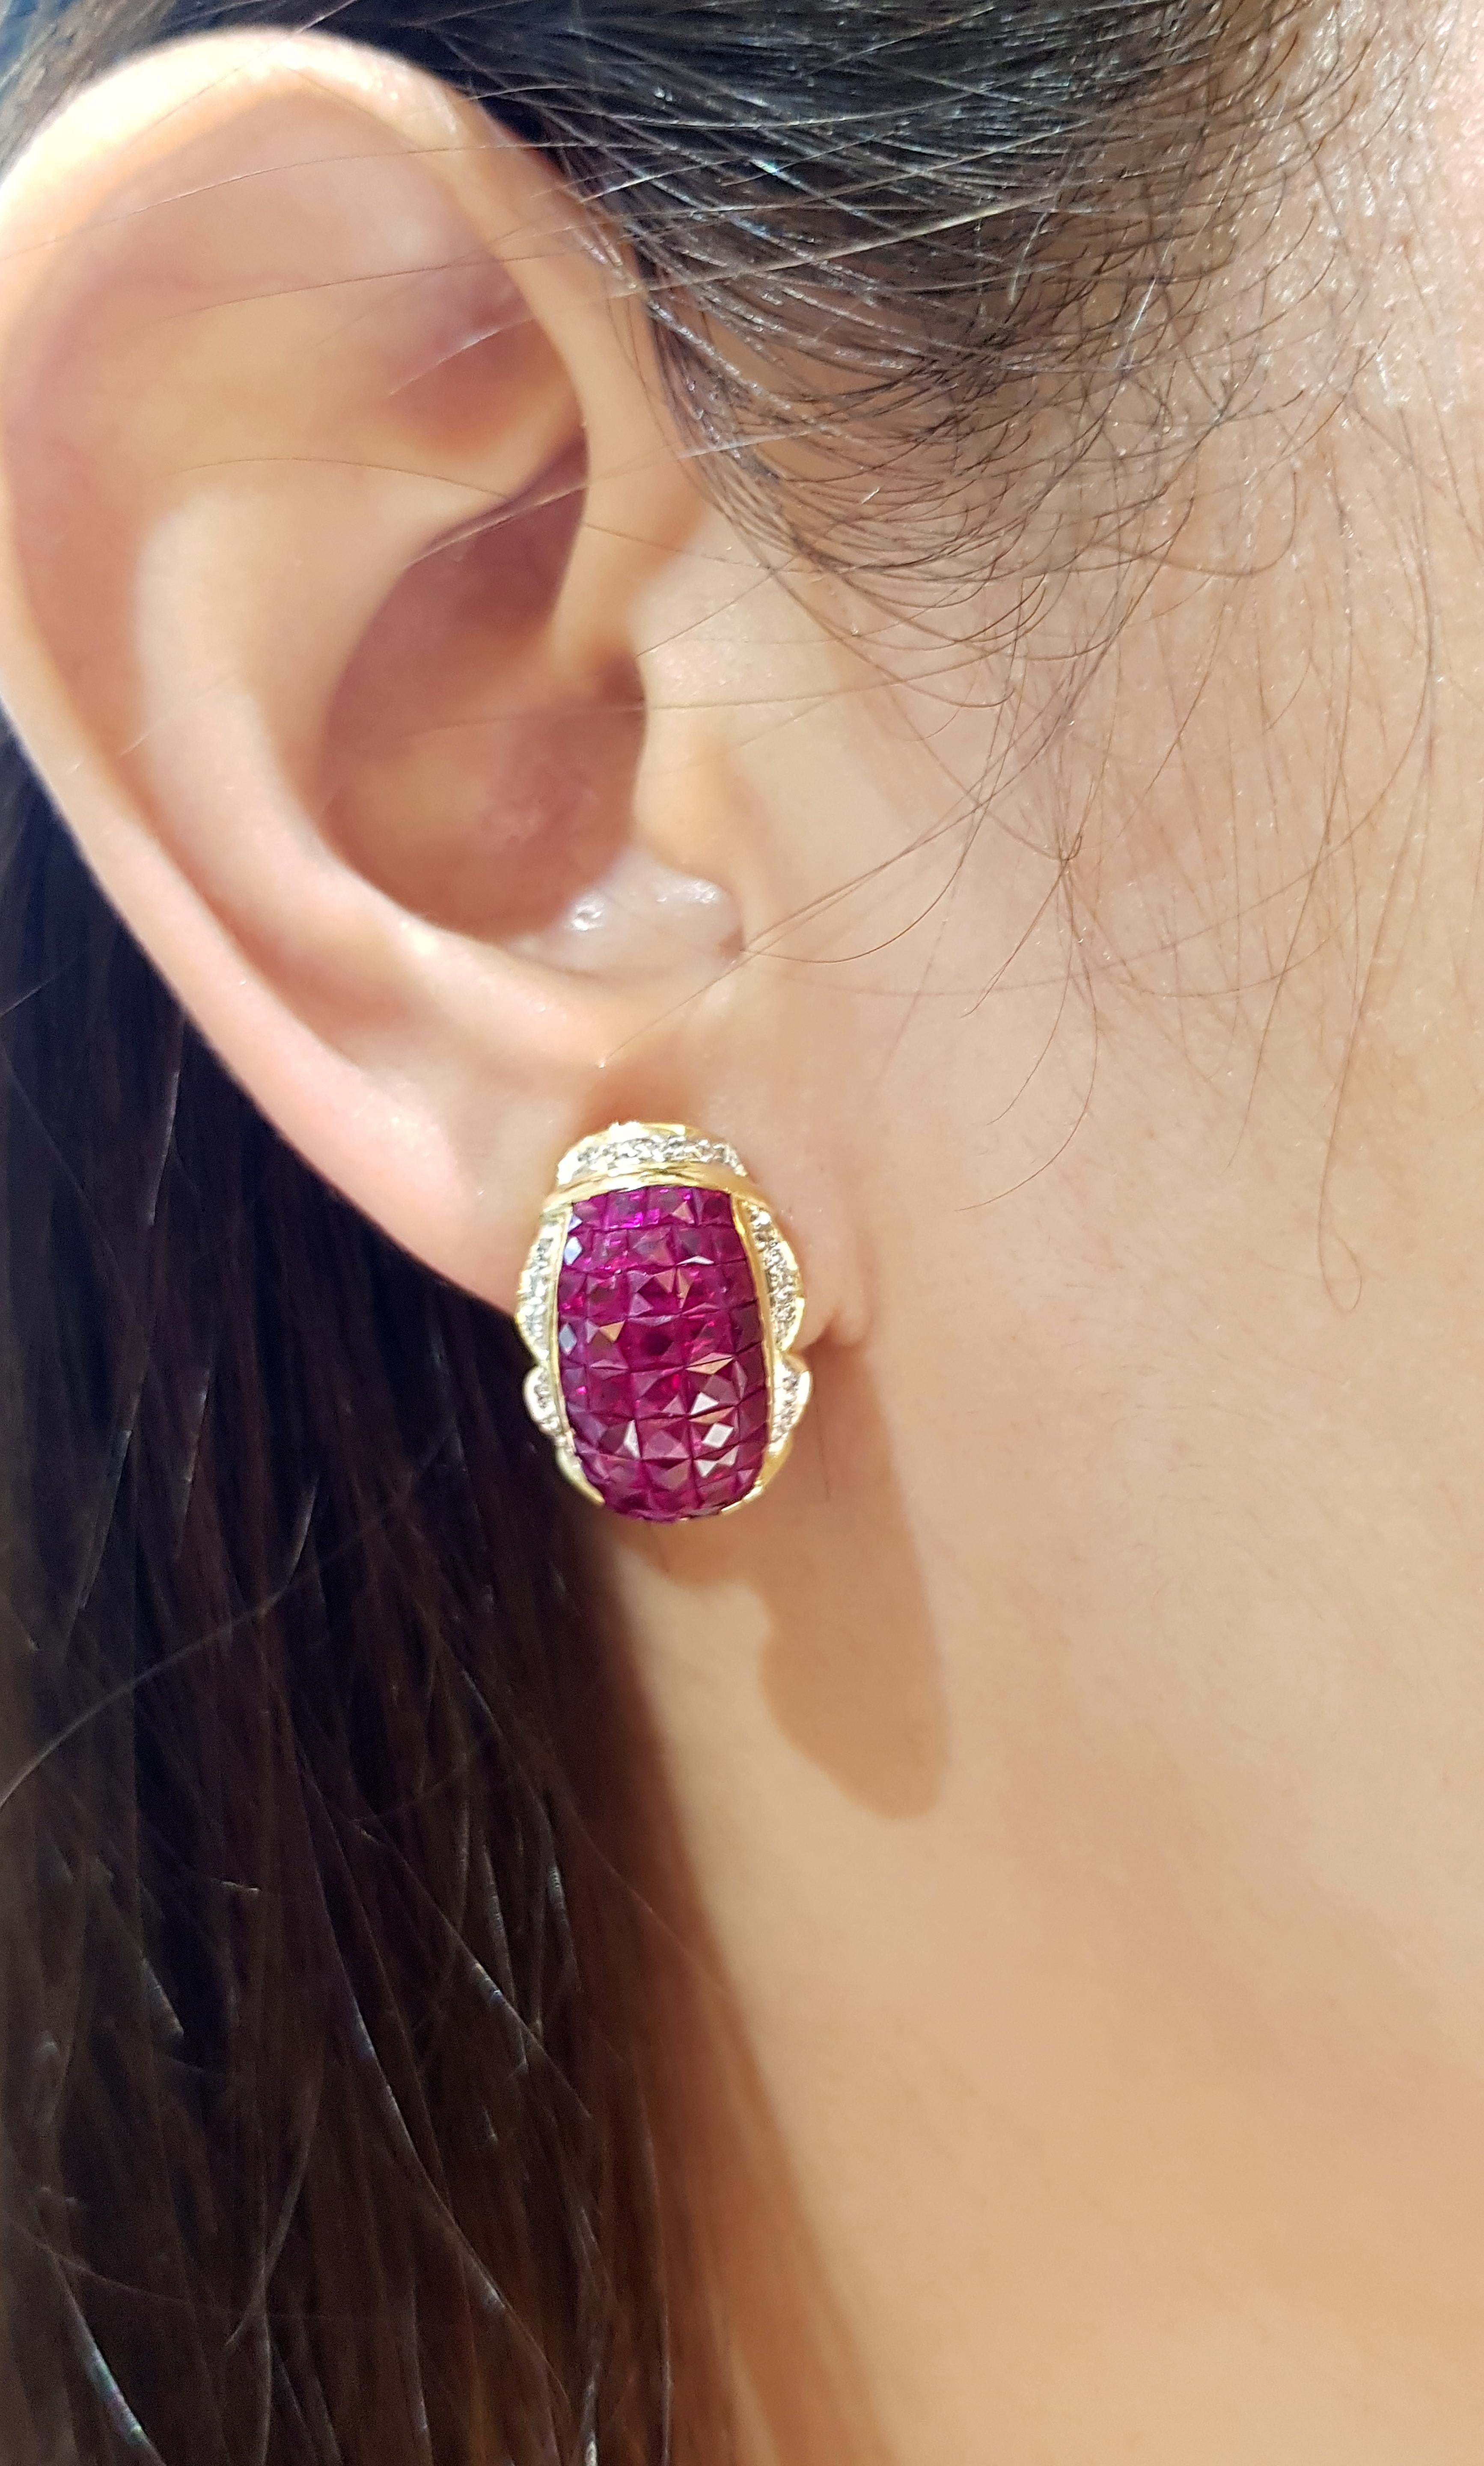 Ruby 8.90 carats with Diamond 0.28 carat Earrings set in 18 Karat Gold Settings

Width:  1.2 cm 
Length: 1.8 cm
Total Weight: 12.72 grams

